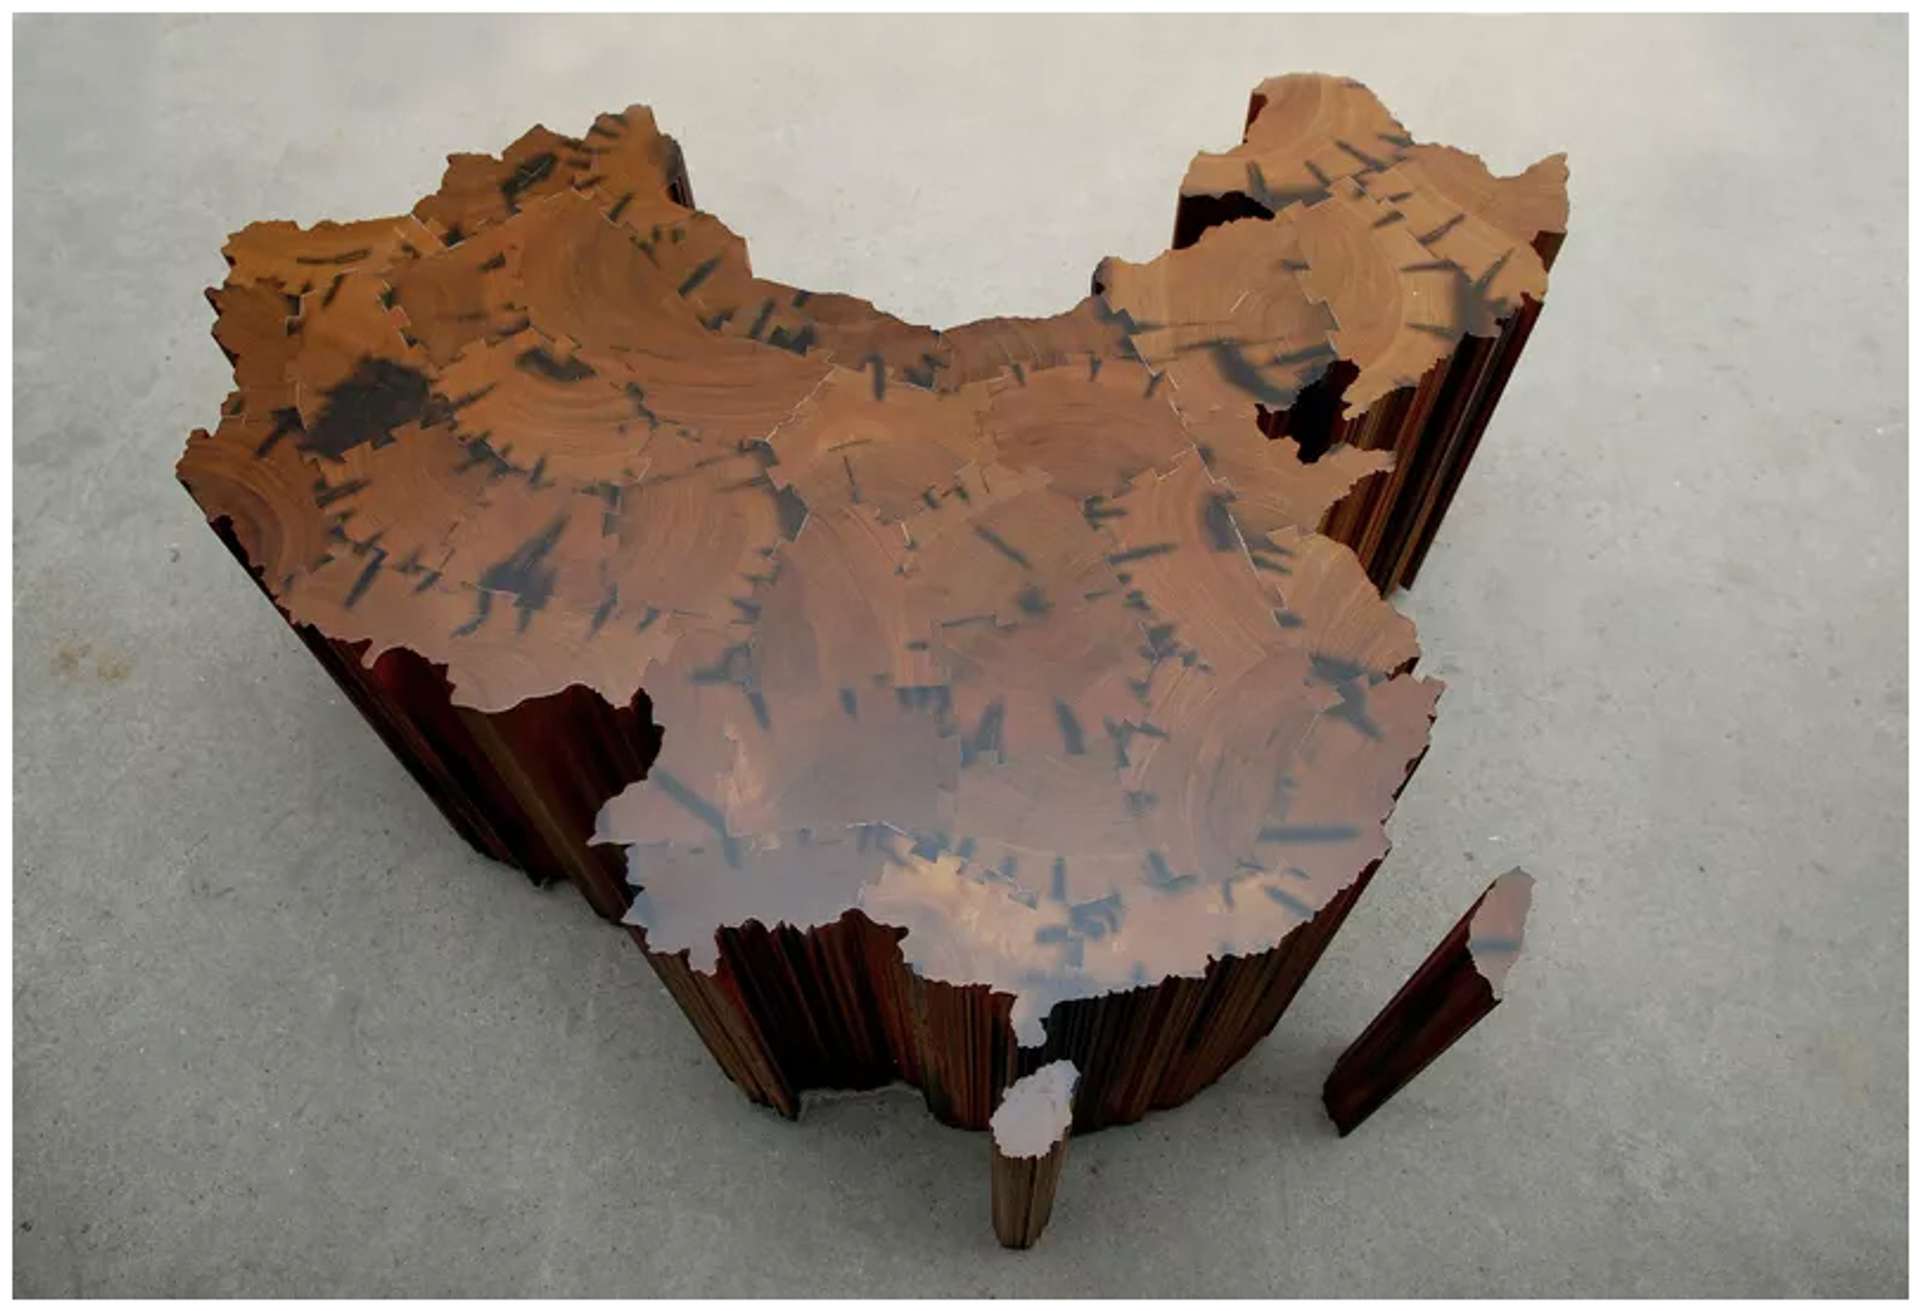  A wooden sculpture representing the shape of the country China when viewed from above.